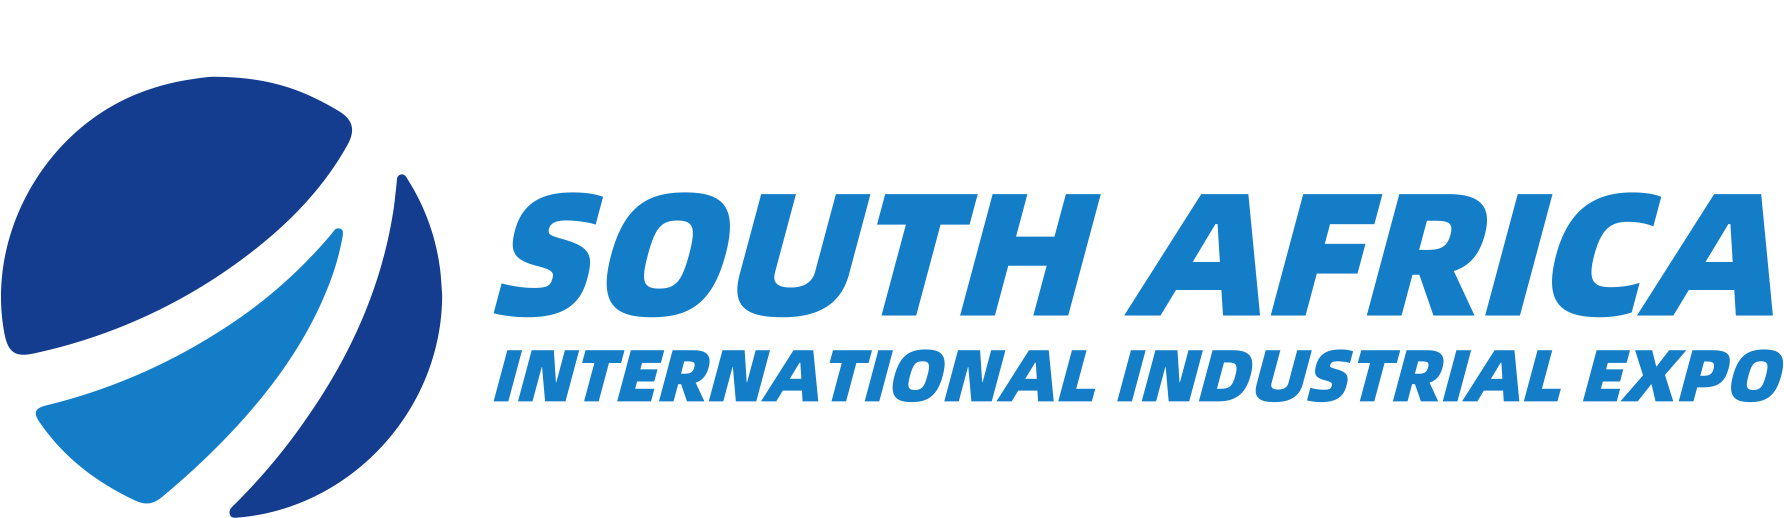 South Africa International Industrial Expo LOGO2.png